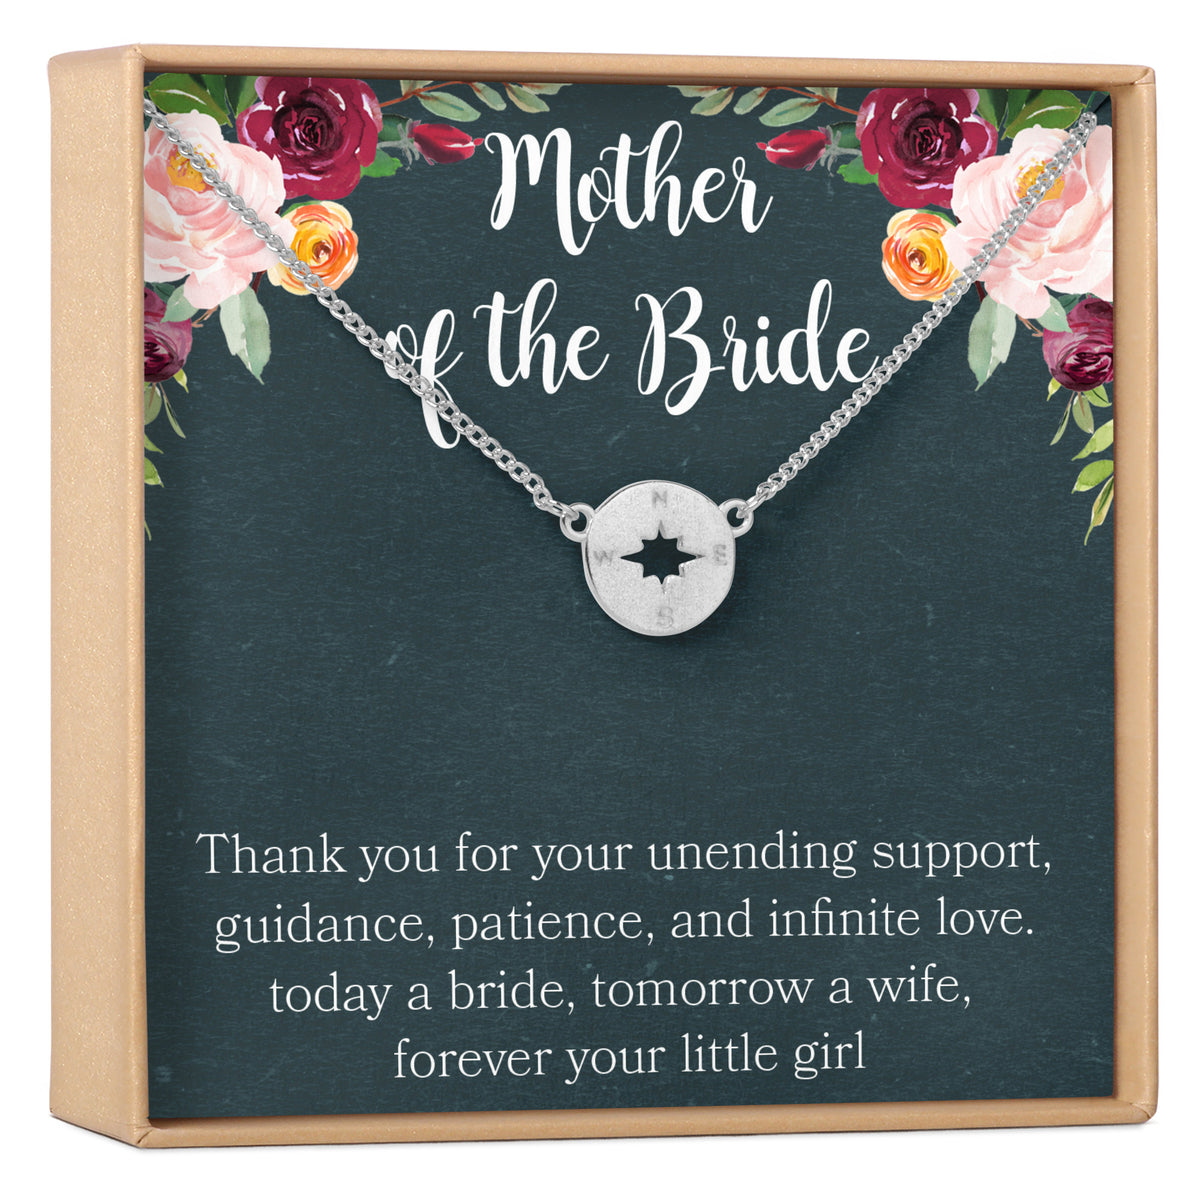 Mother of the Bride Necklace, Multiple Styles